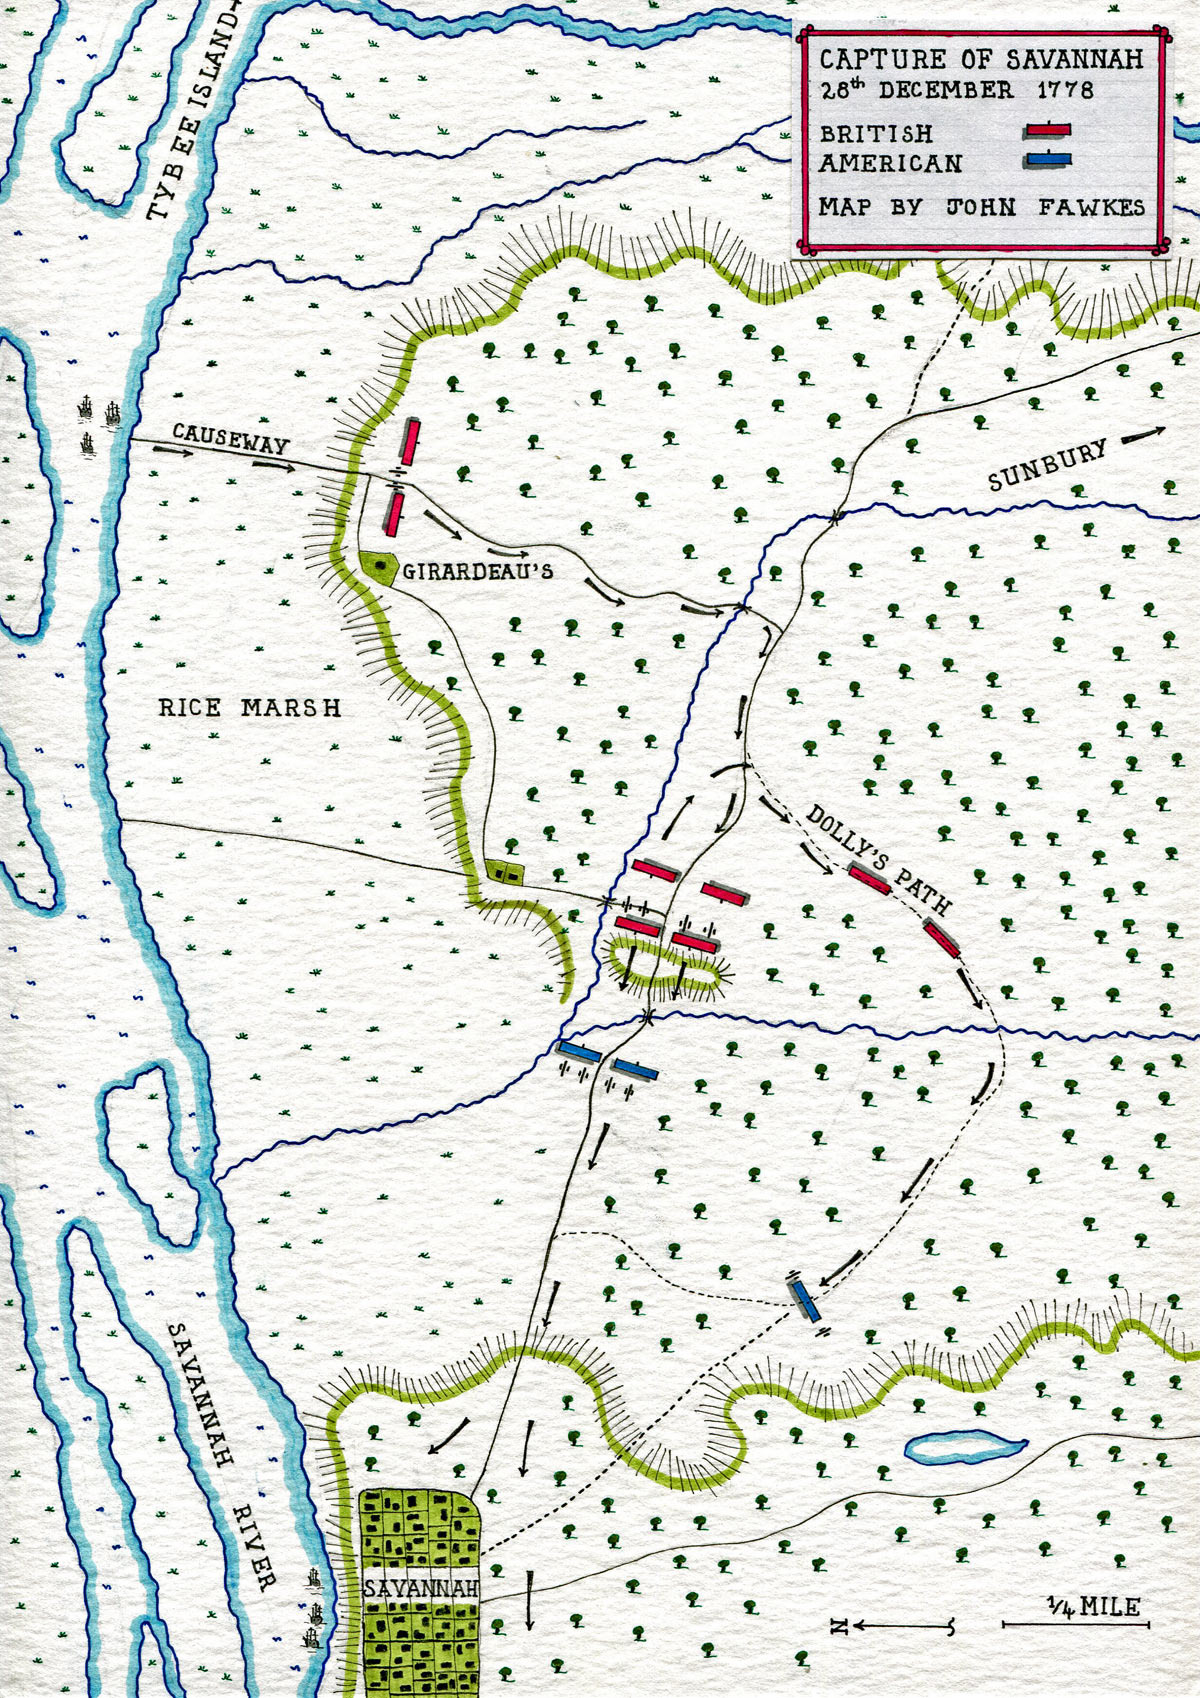 Map of the capture of Savannah on 28th December 1778 in the American Revolutionary War: map by John Fawkes